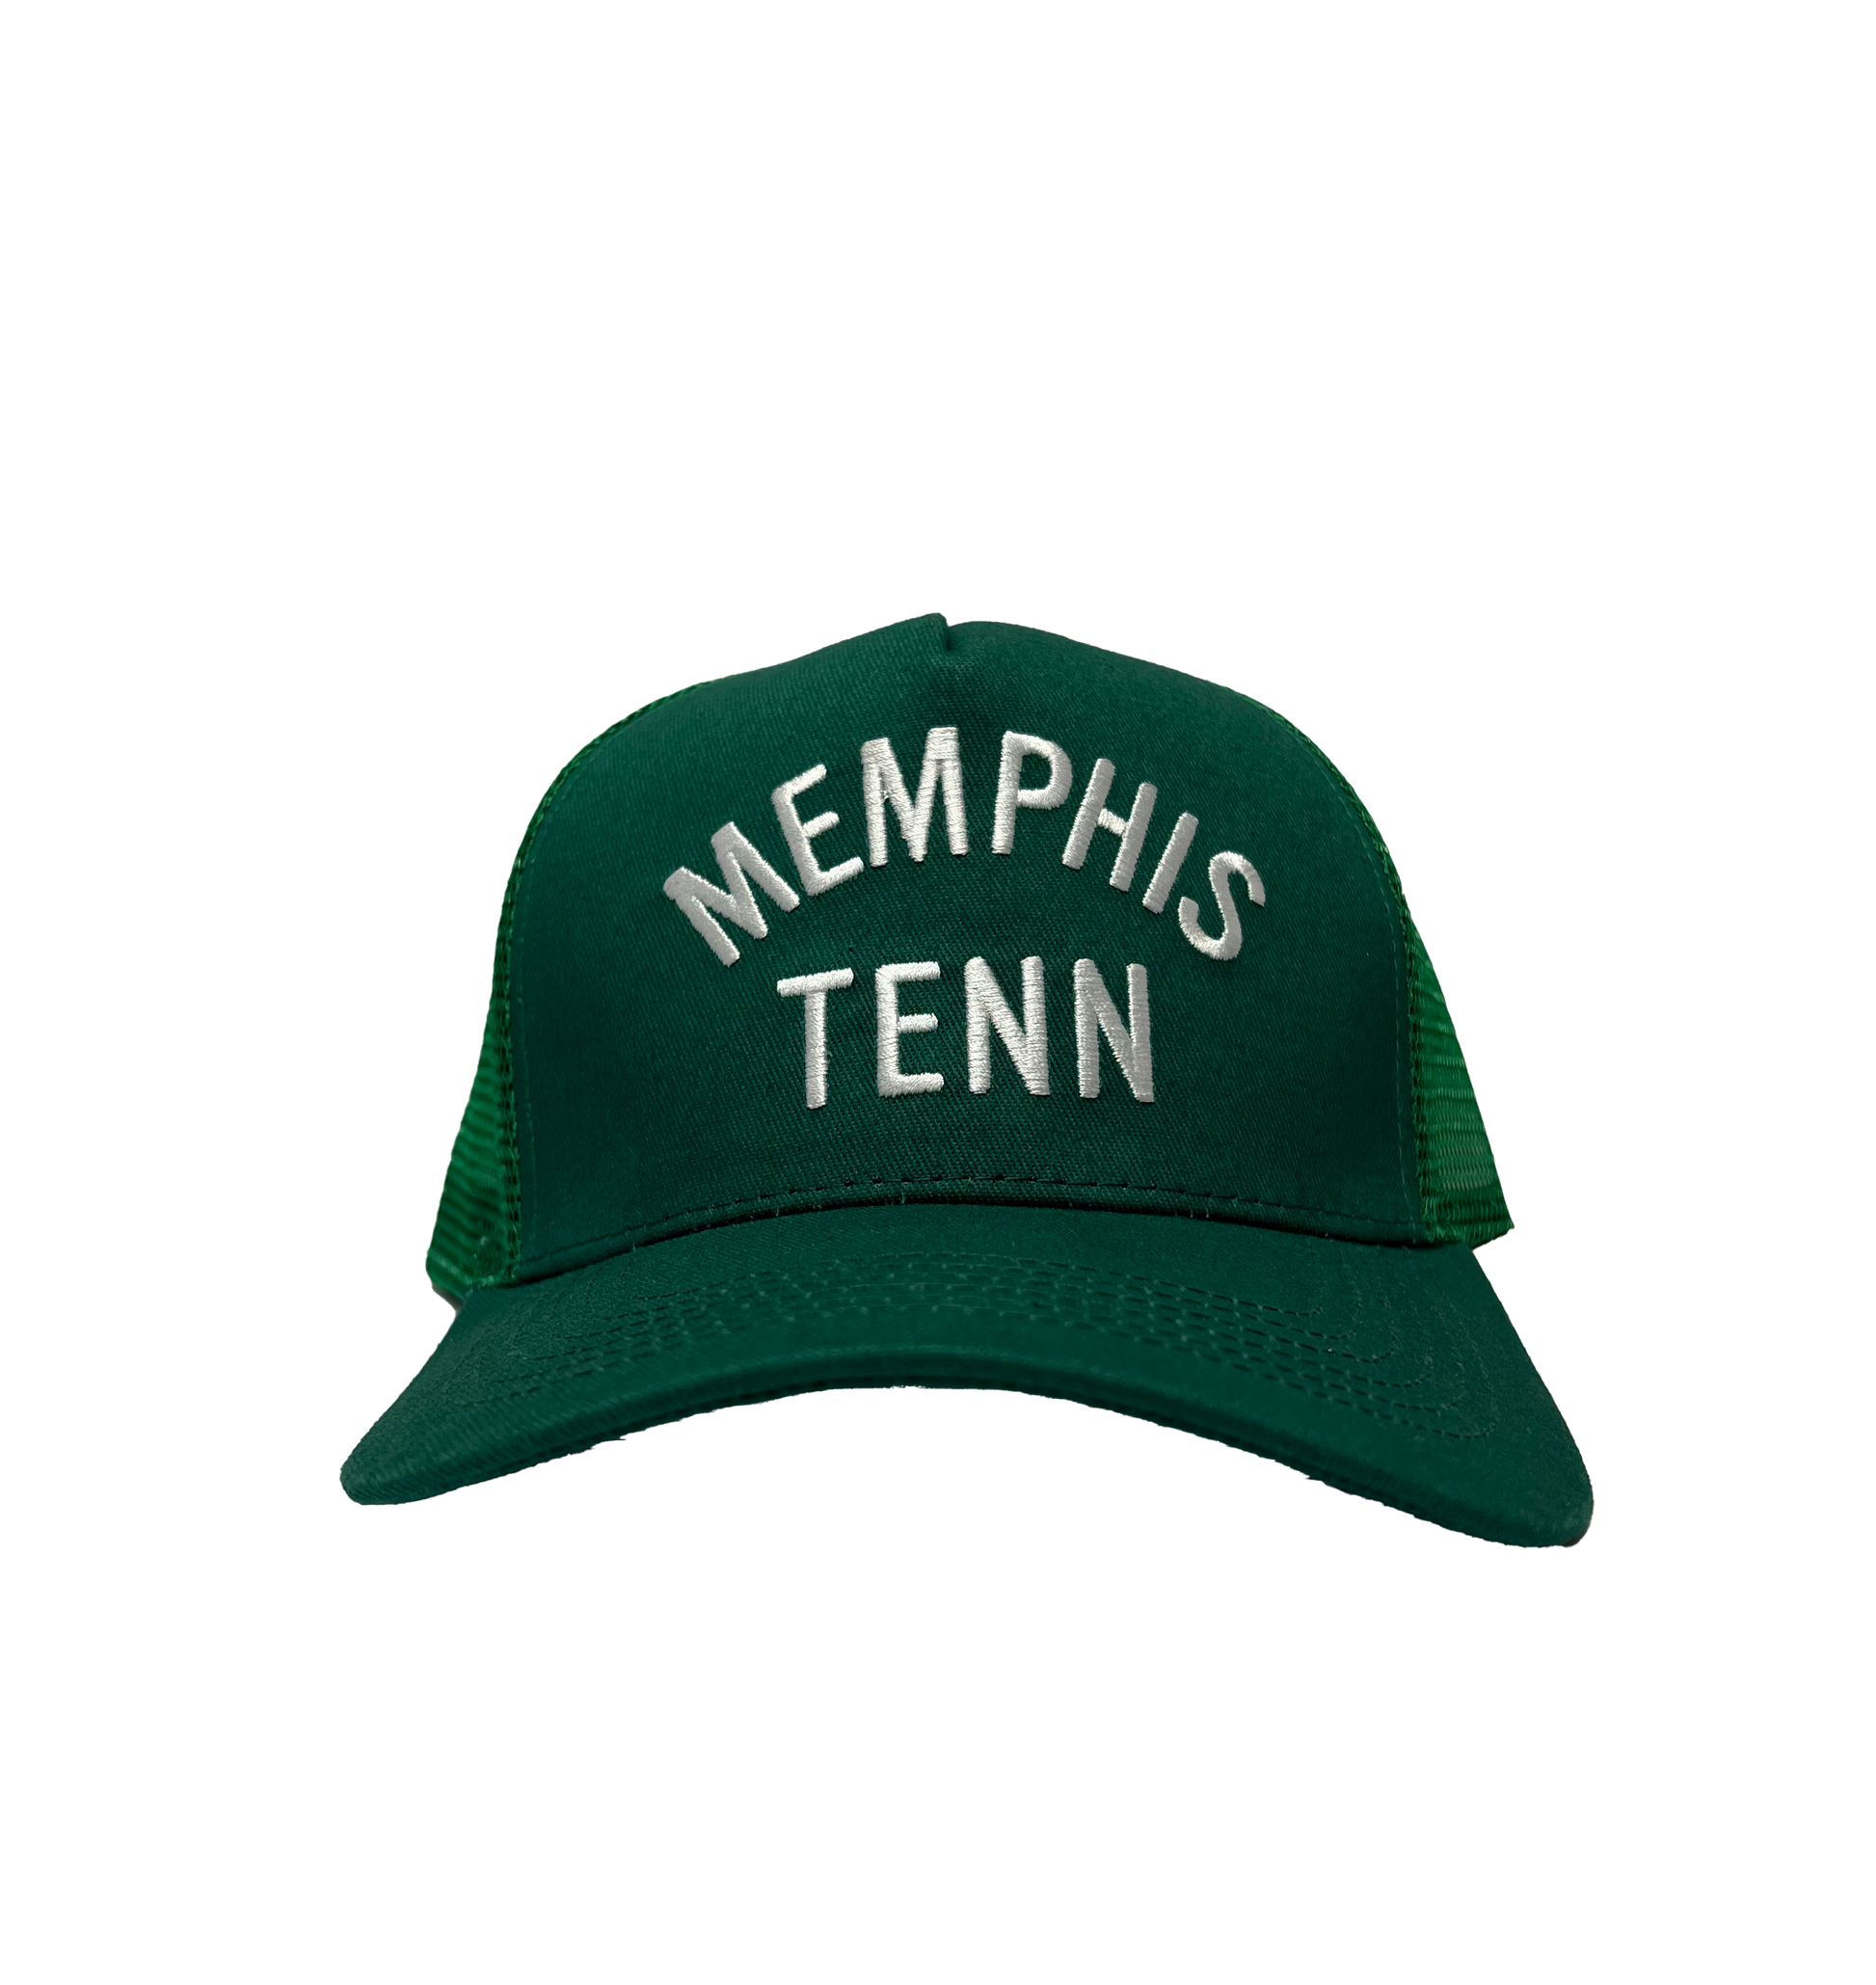 Memphis Tenn Dark Green Trucker Hat with "901" embroidered in white thread, displayed against a gradient background from Choose901 Merch Shop.